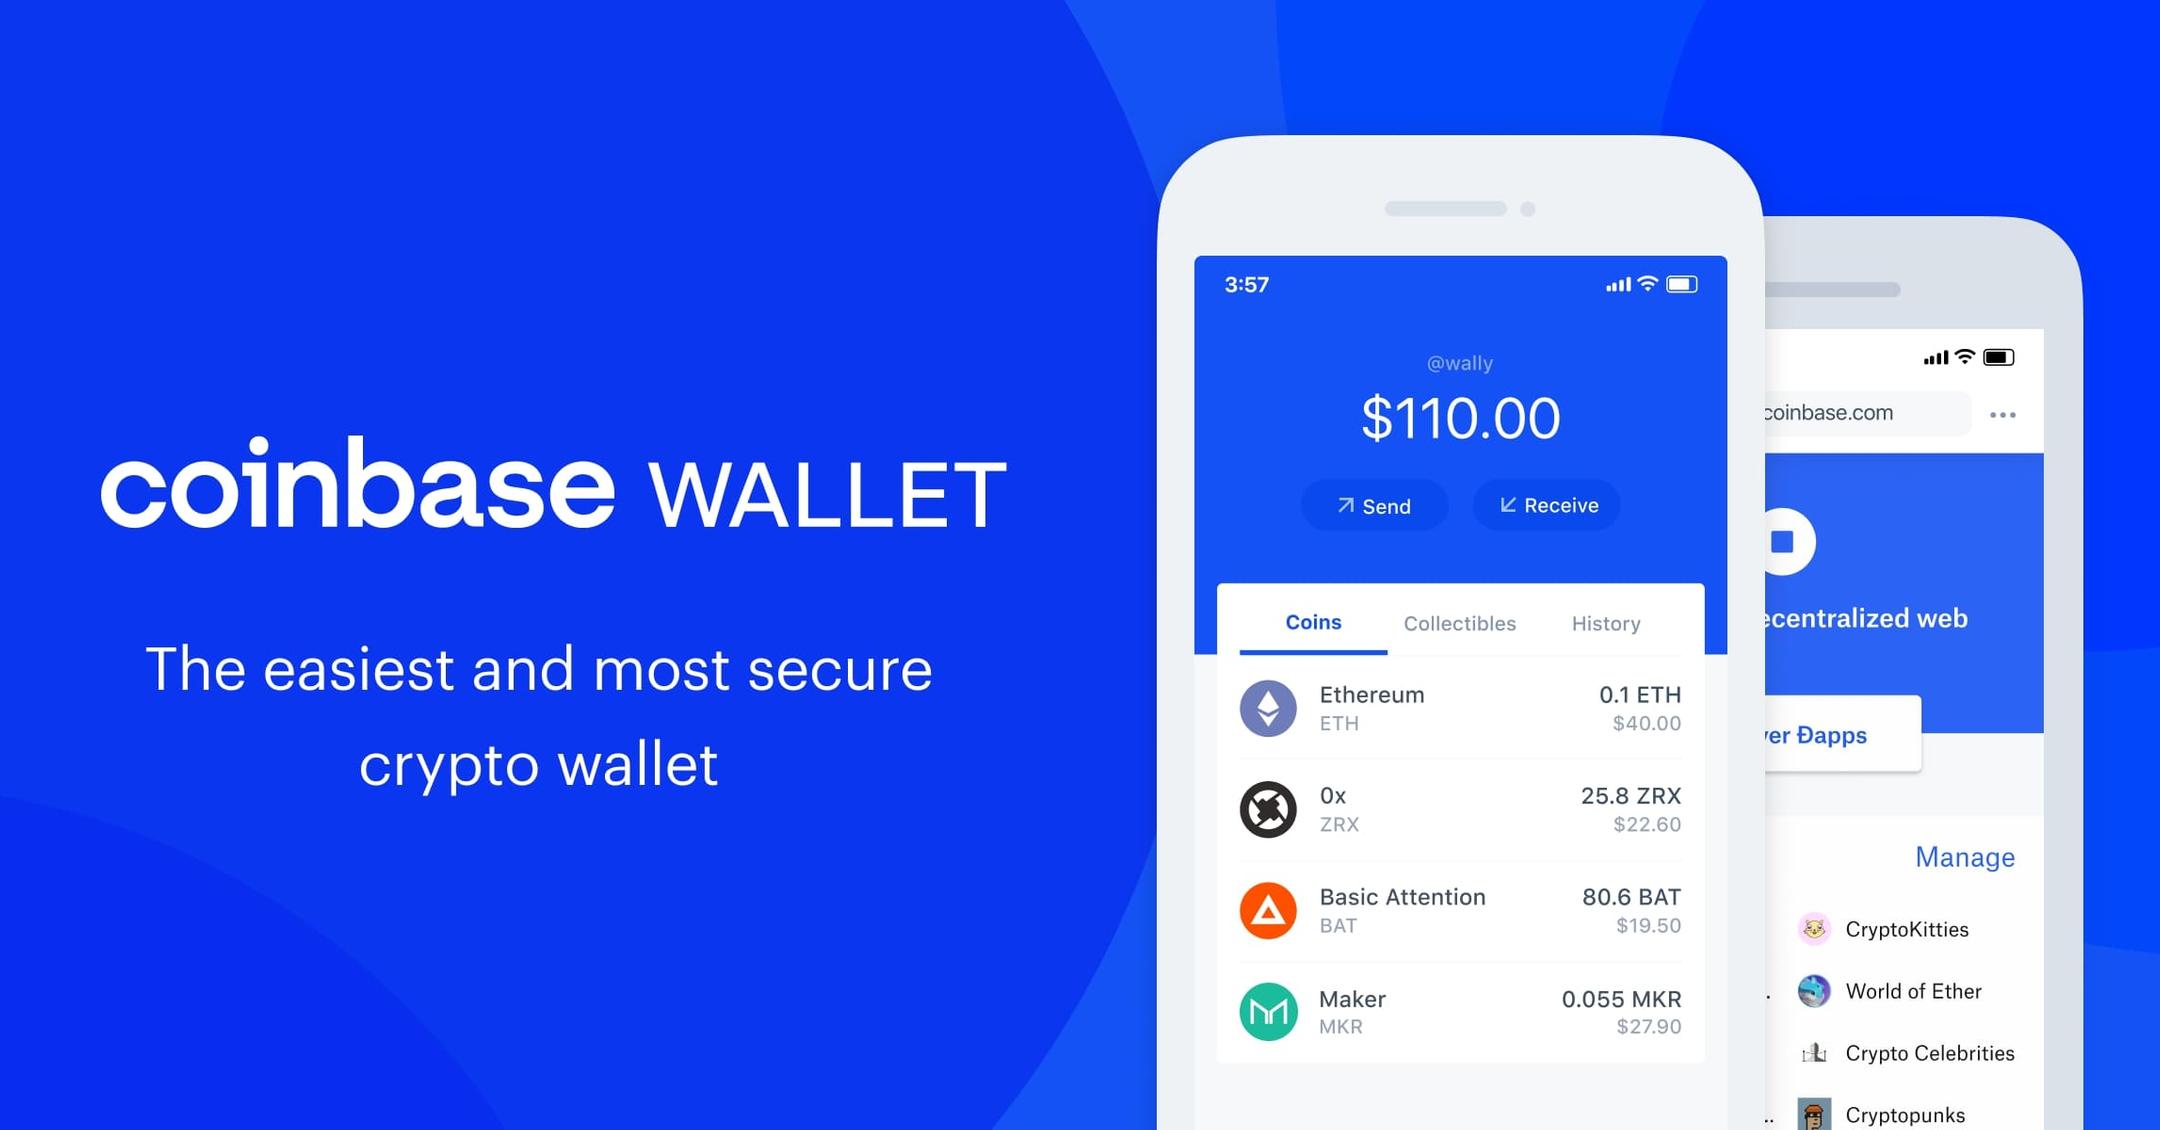 is there a fee to transfer to coinbase wallet